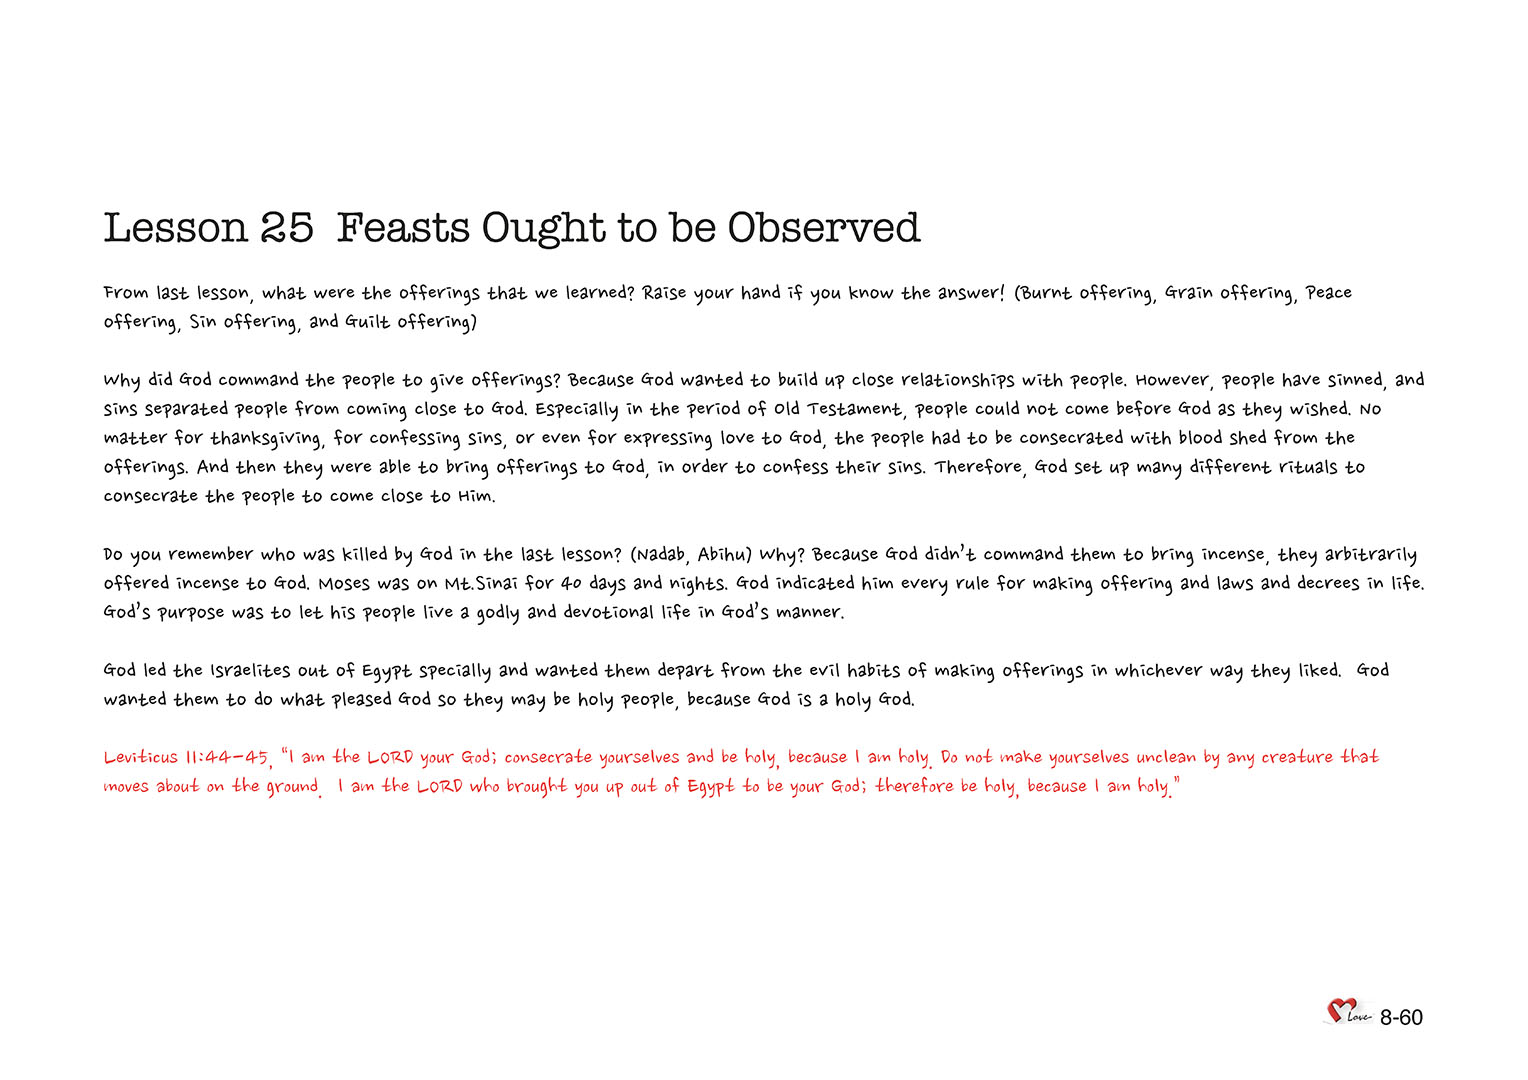 Chapter 8 - Lesson 25 - Feasts Ought to be Observed